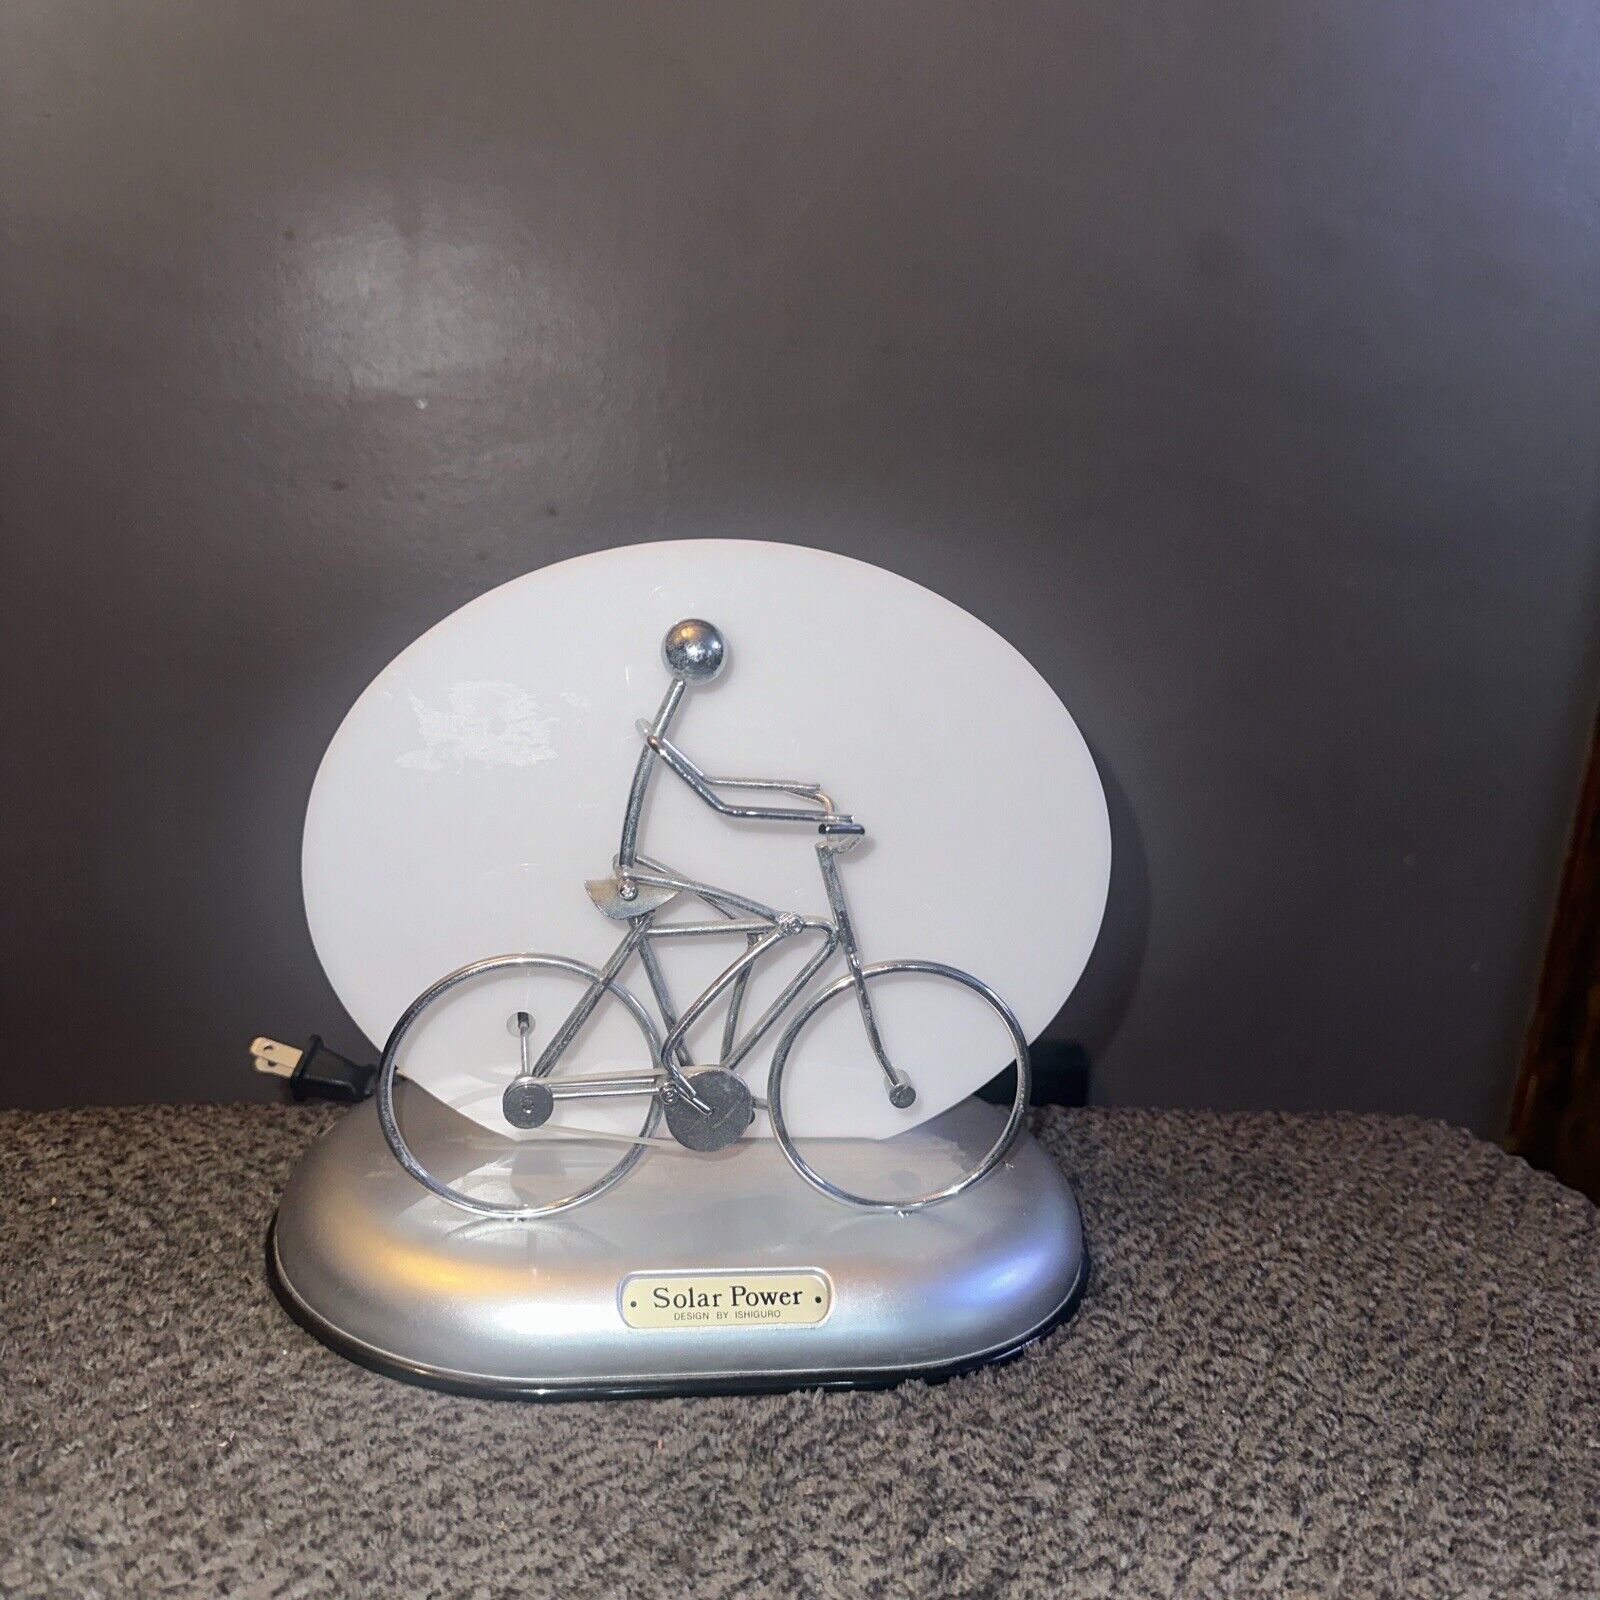 Vintage Solar Power by Ishiguro - Motion Man Pedaling Bicycle Bike Table Lamp